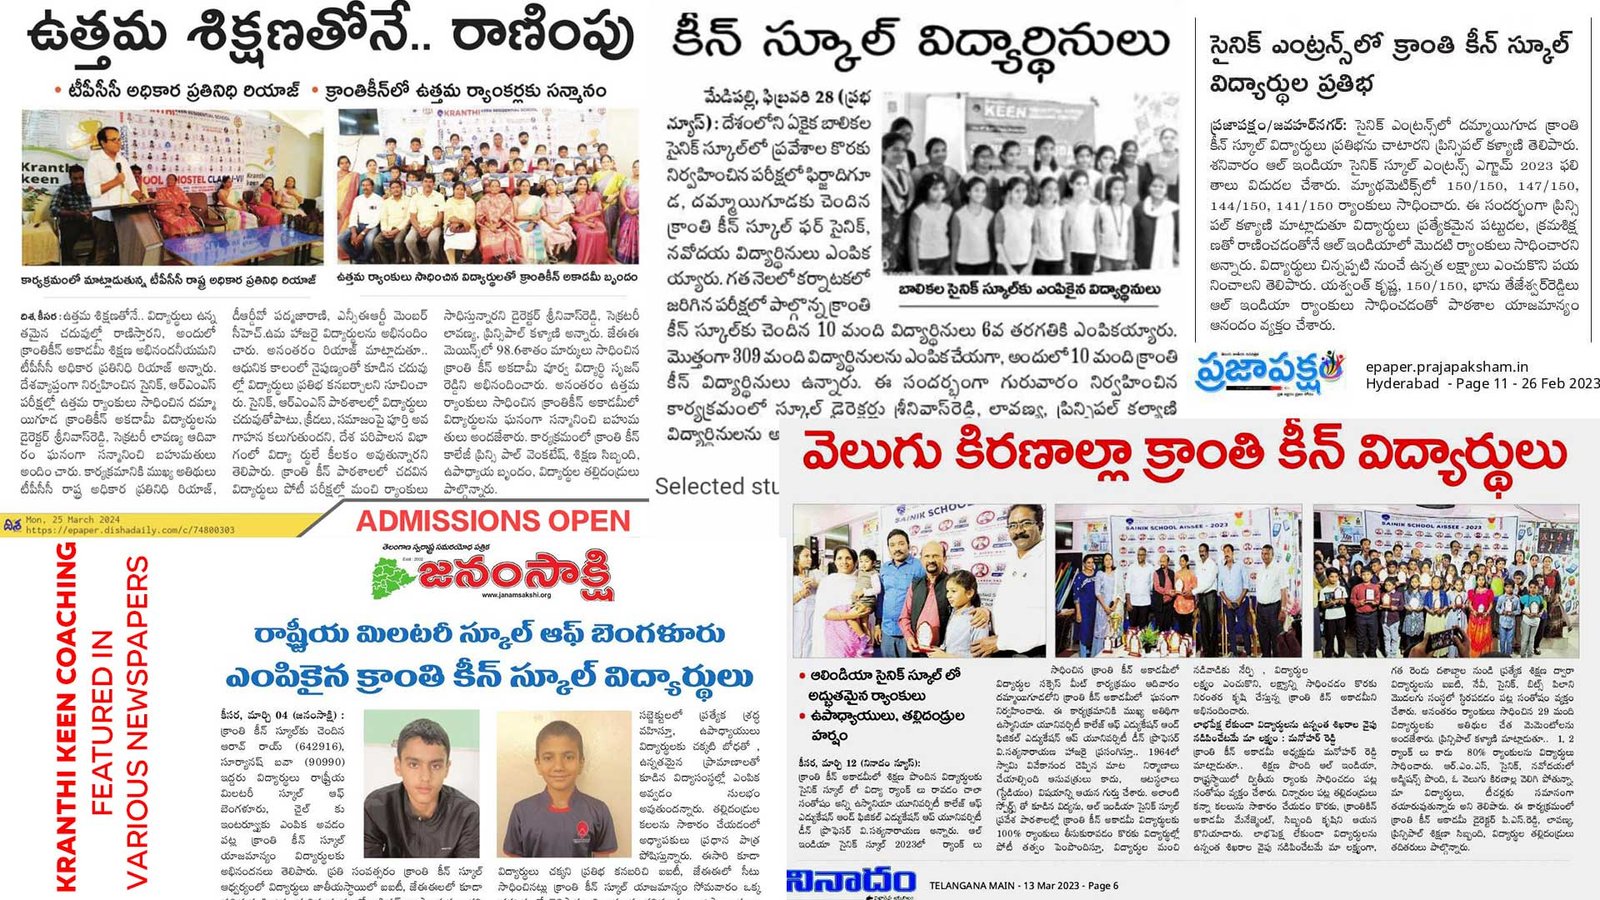 kranthi keen coaching featured in various newspapers where students scored top marks in sainik school aissee exam